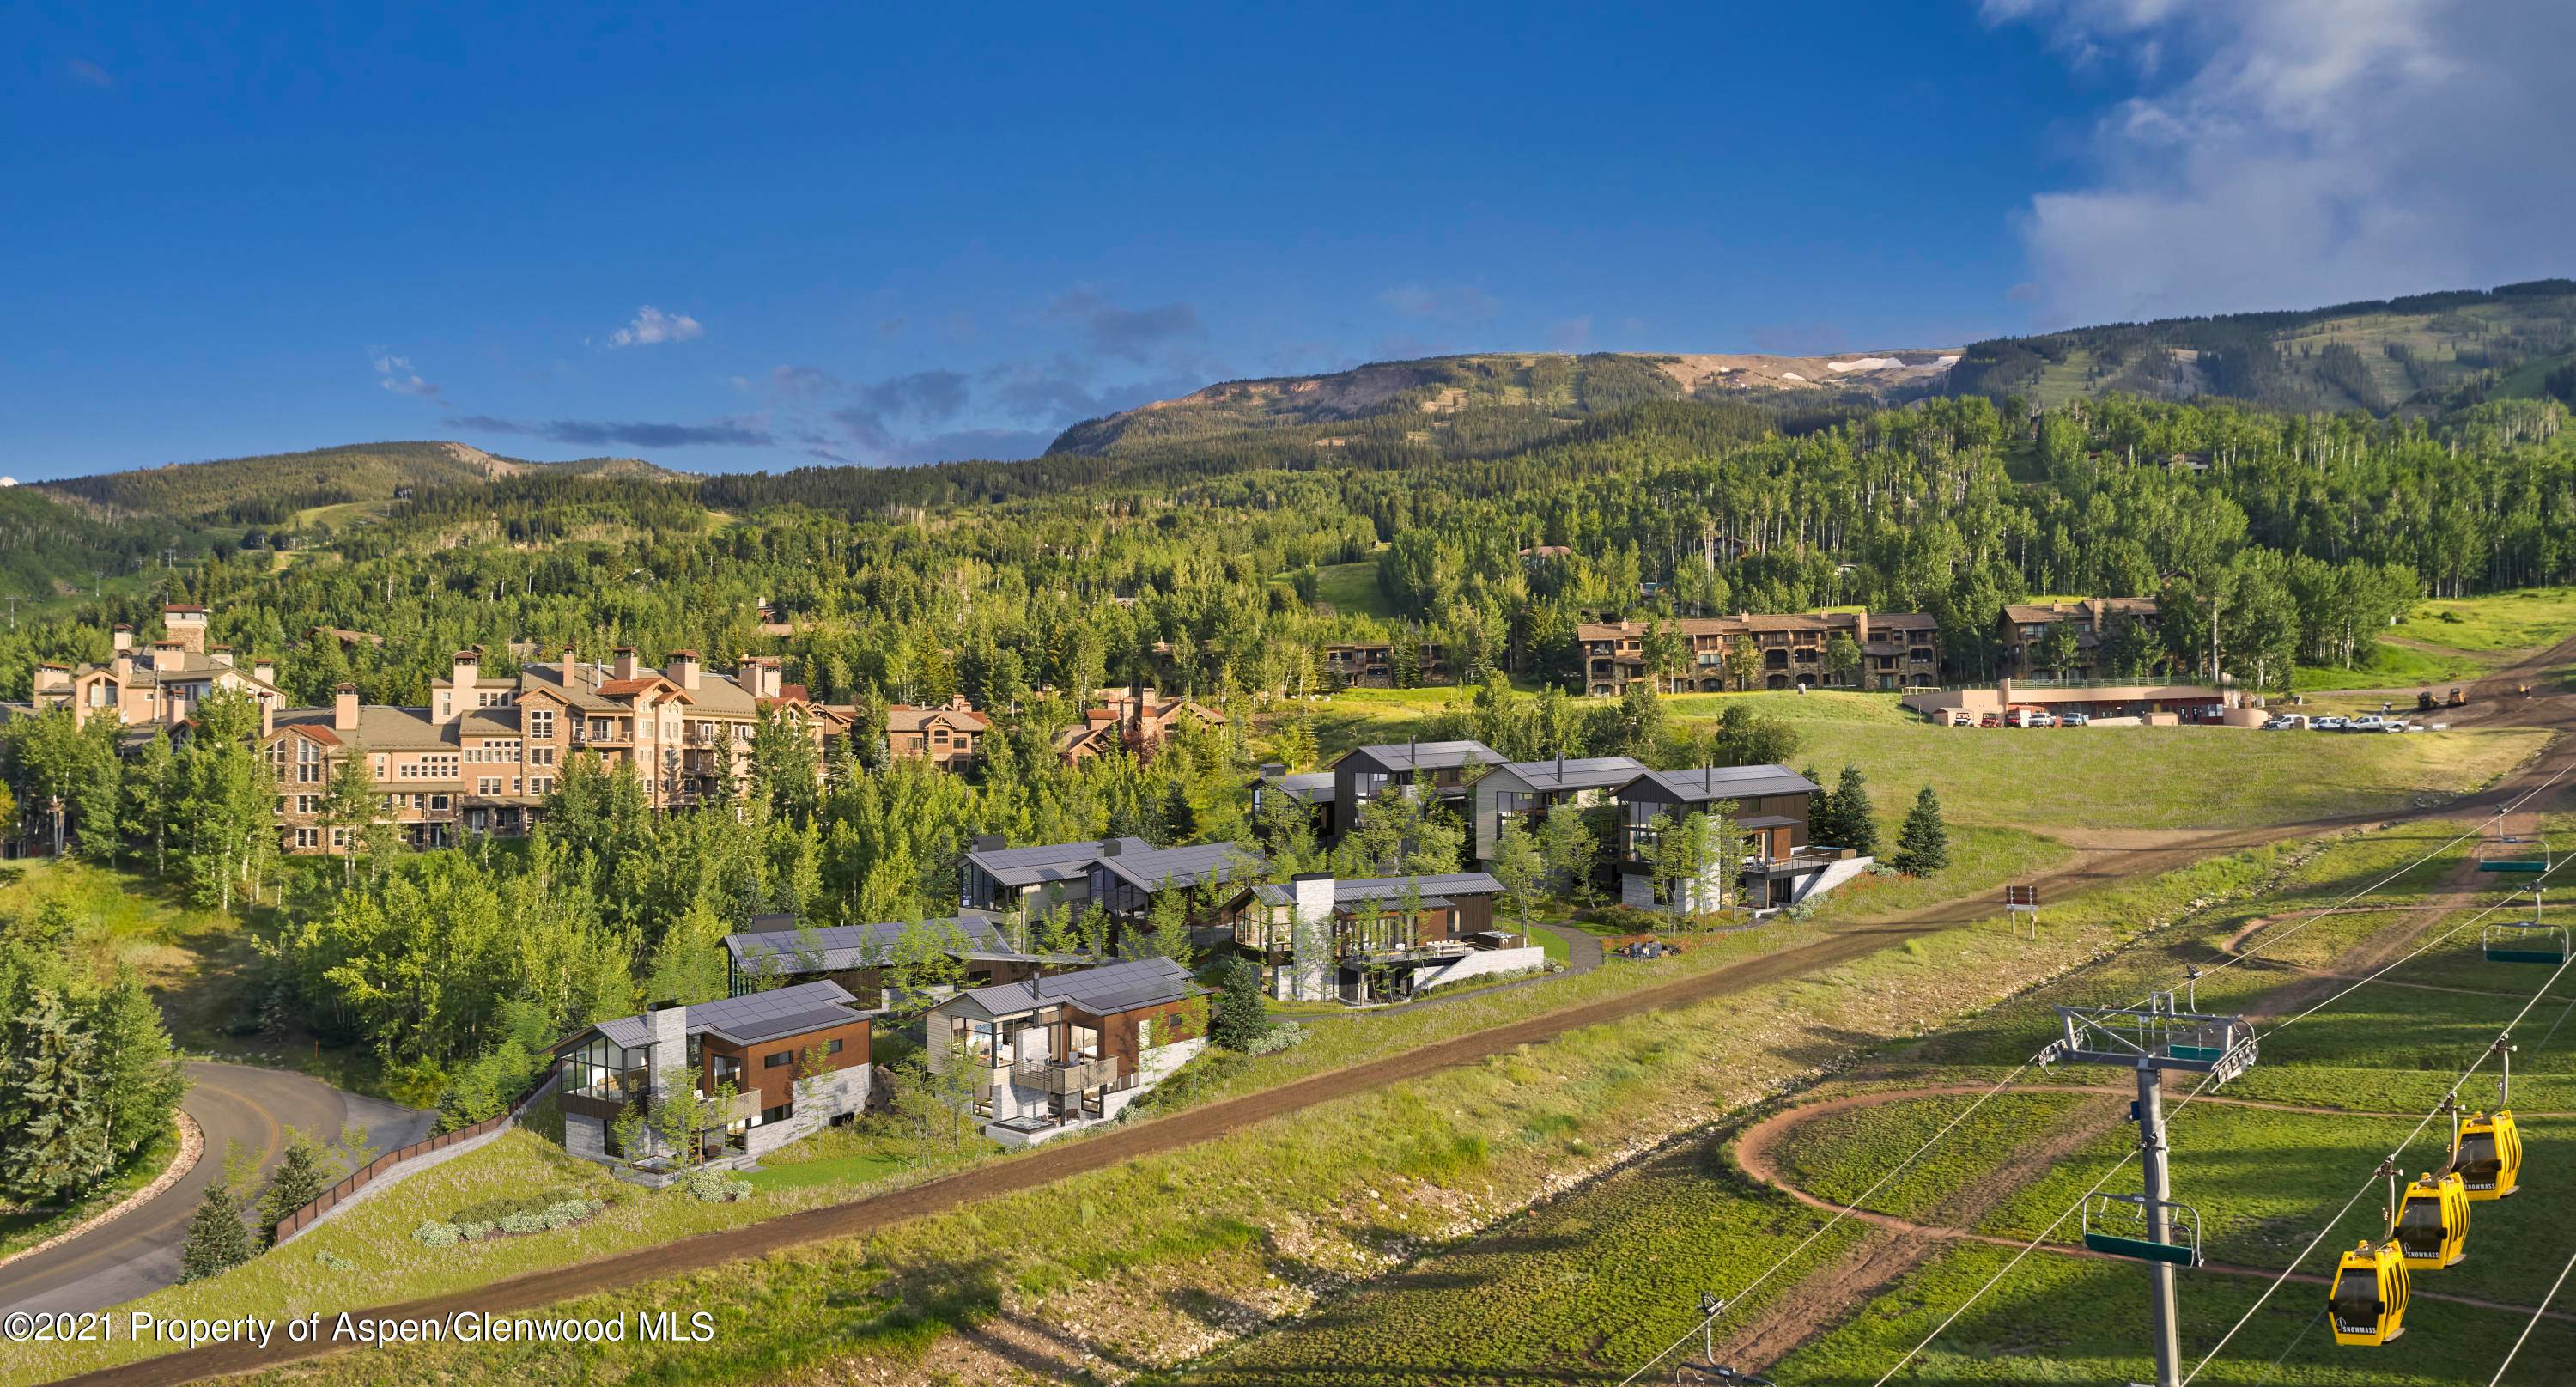 Minutes away from the spirited social vibe of Snowmass Village, yet perfectly private, this 3 bedroom home opens up to unobstructed views of Base Village and Brush Creek Valley through ...